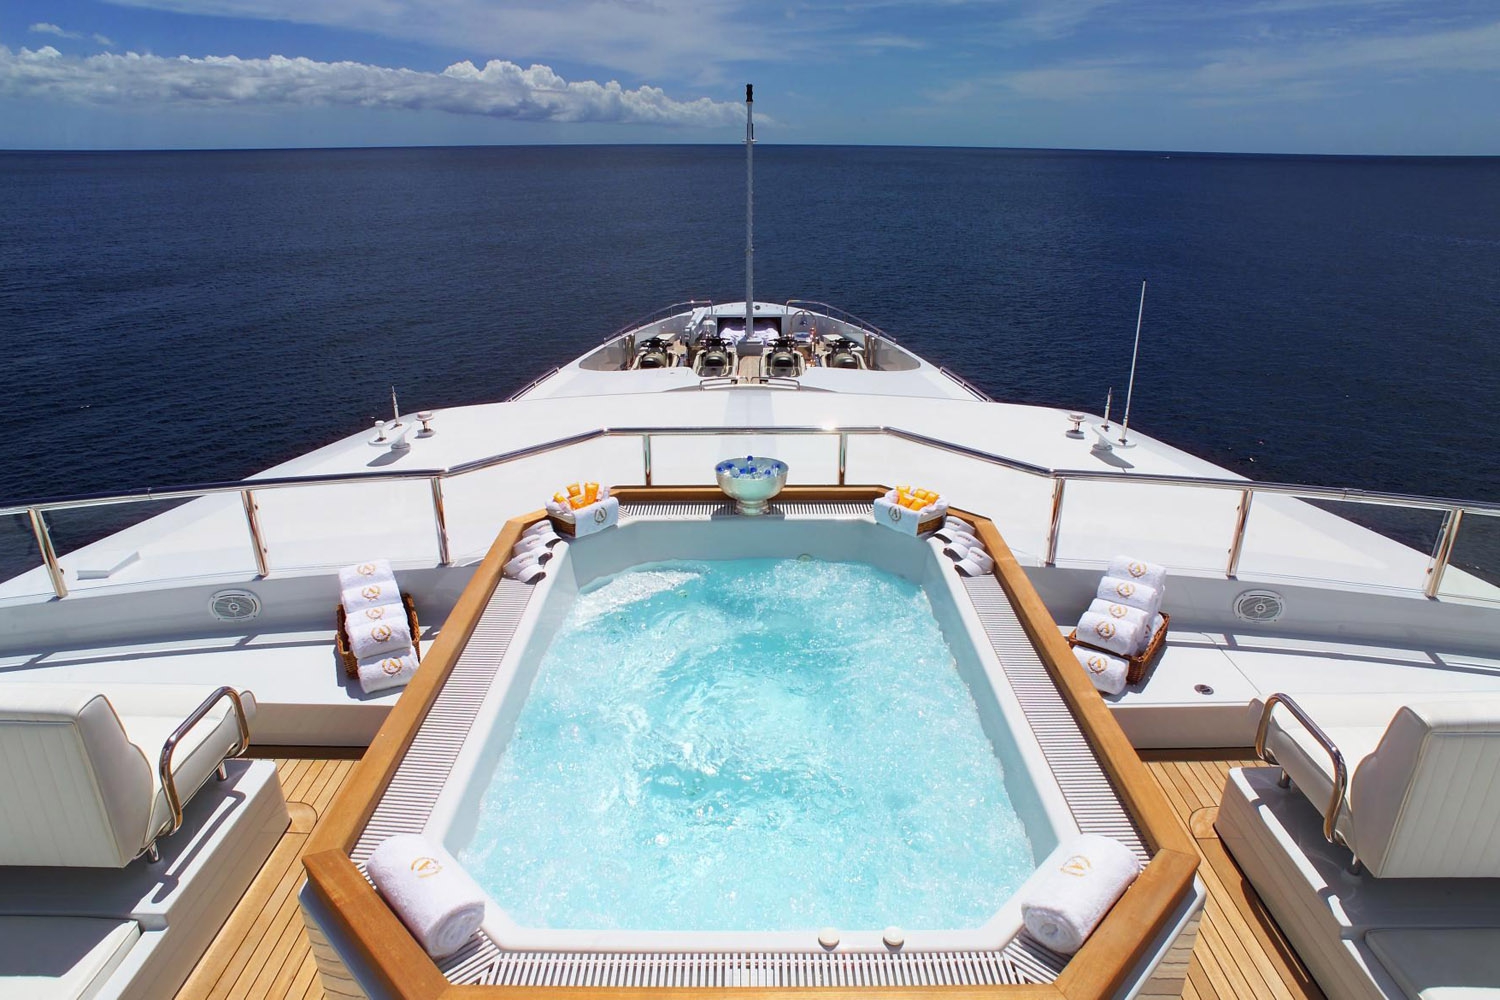 Yacht APOGEE - 12 Person Jacuzzi Pool